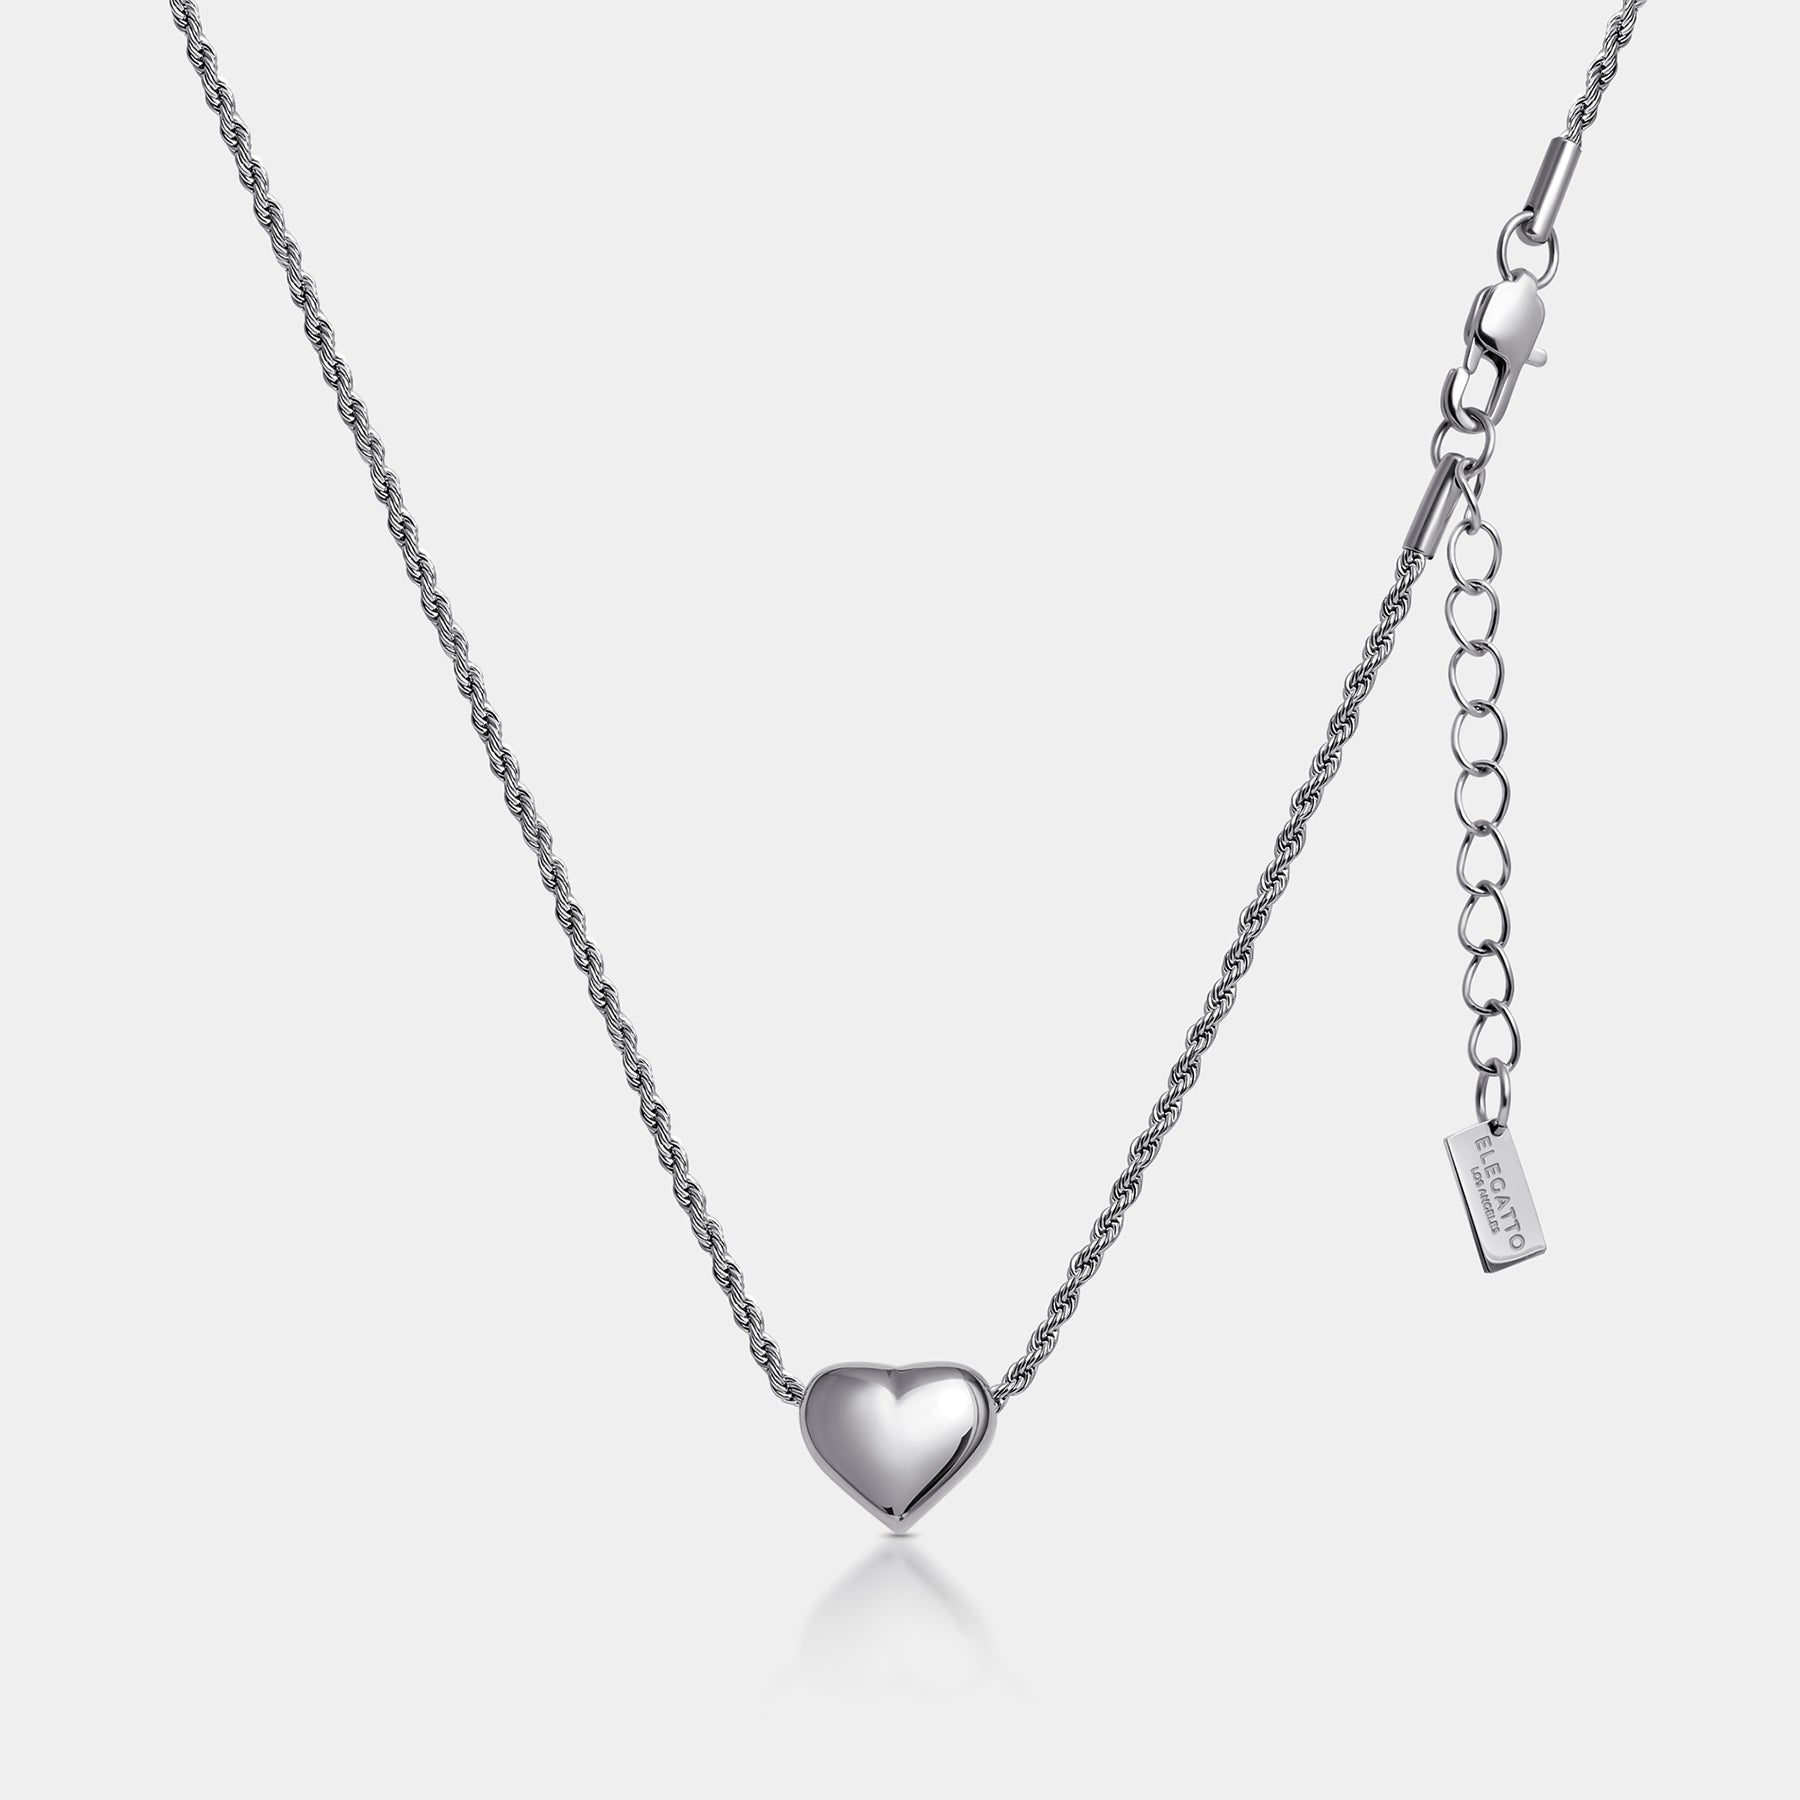 Heart Necklace in Silver